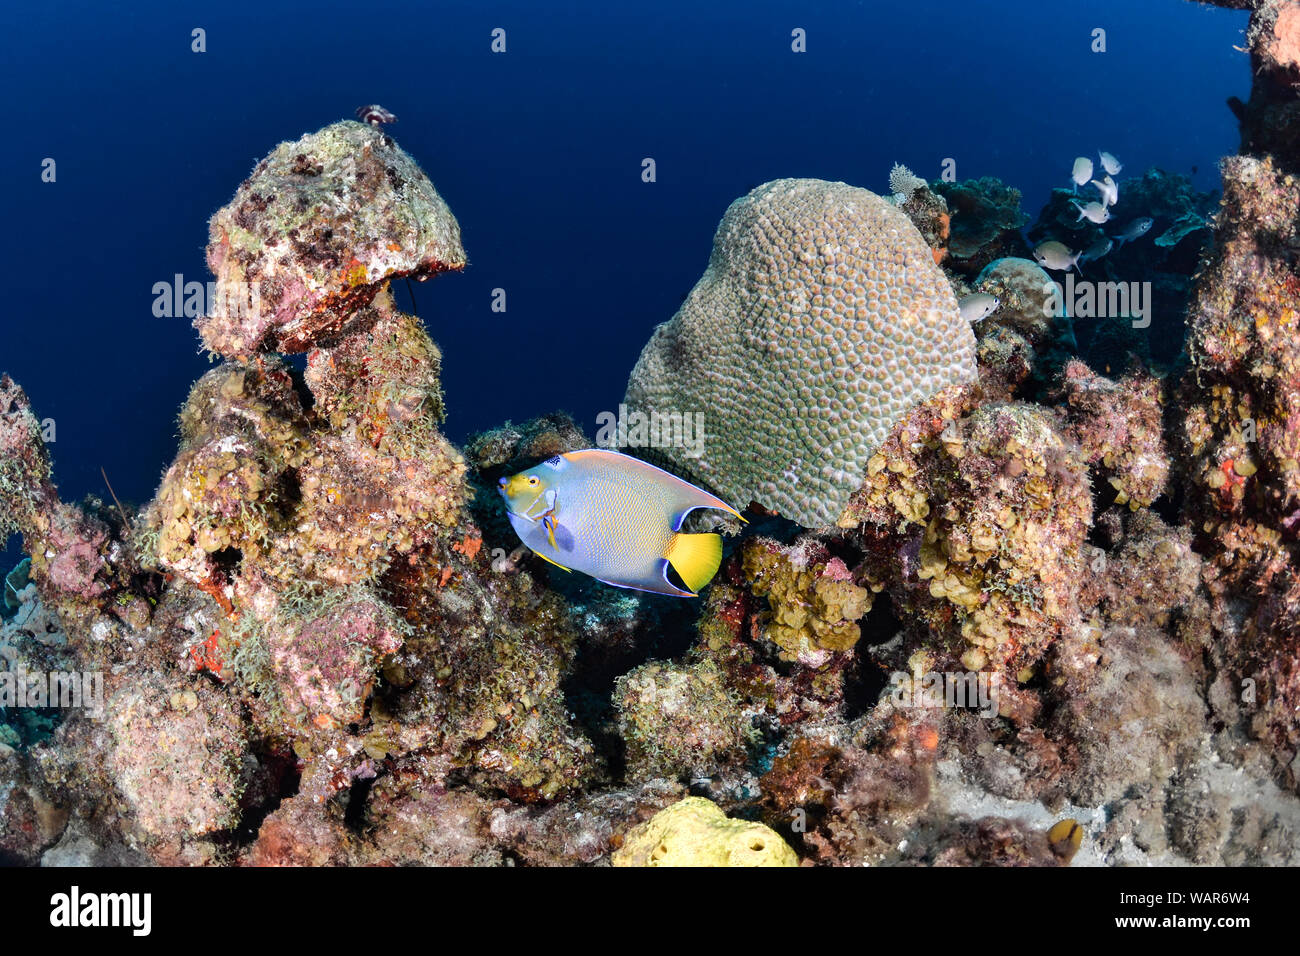 Queen angelfish with reef in the back Stock Photo